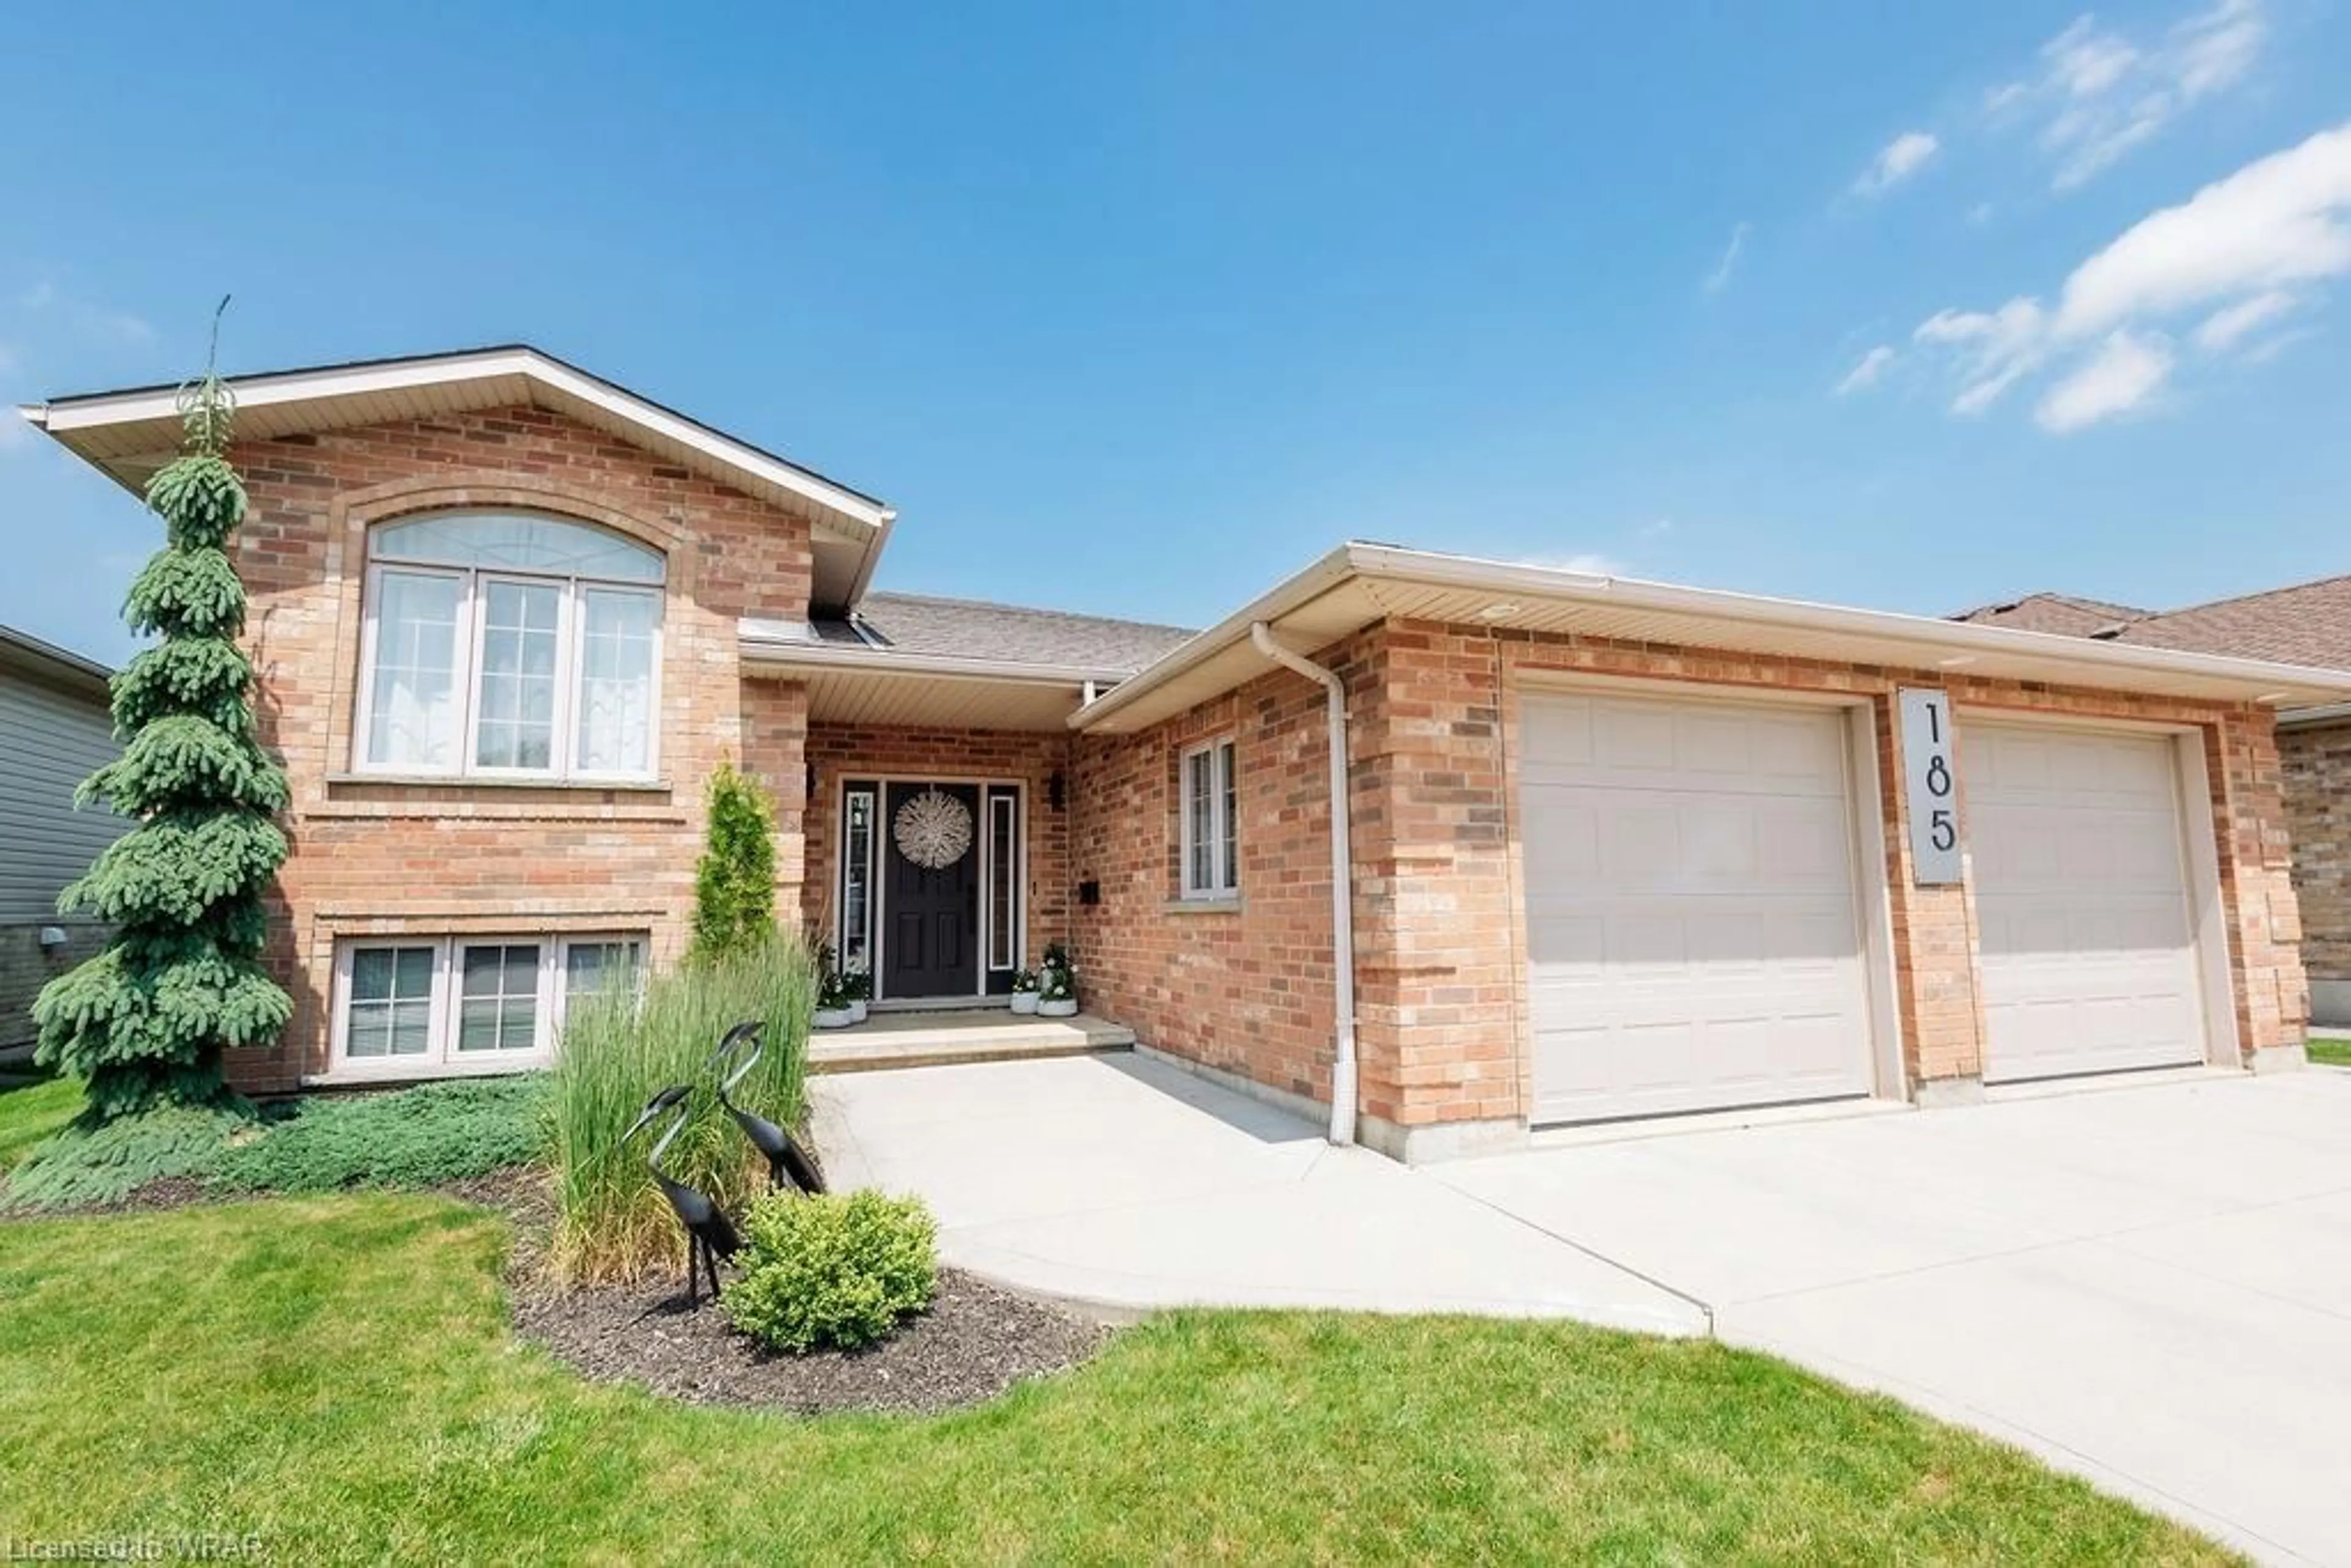 Home with brick exterior material for 185 Denstedt St, Listowel Ontario N4W 3W2